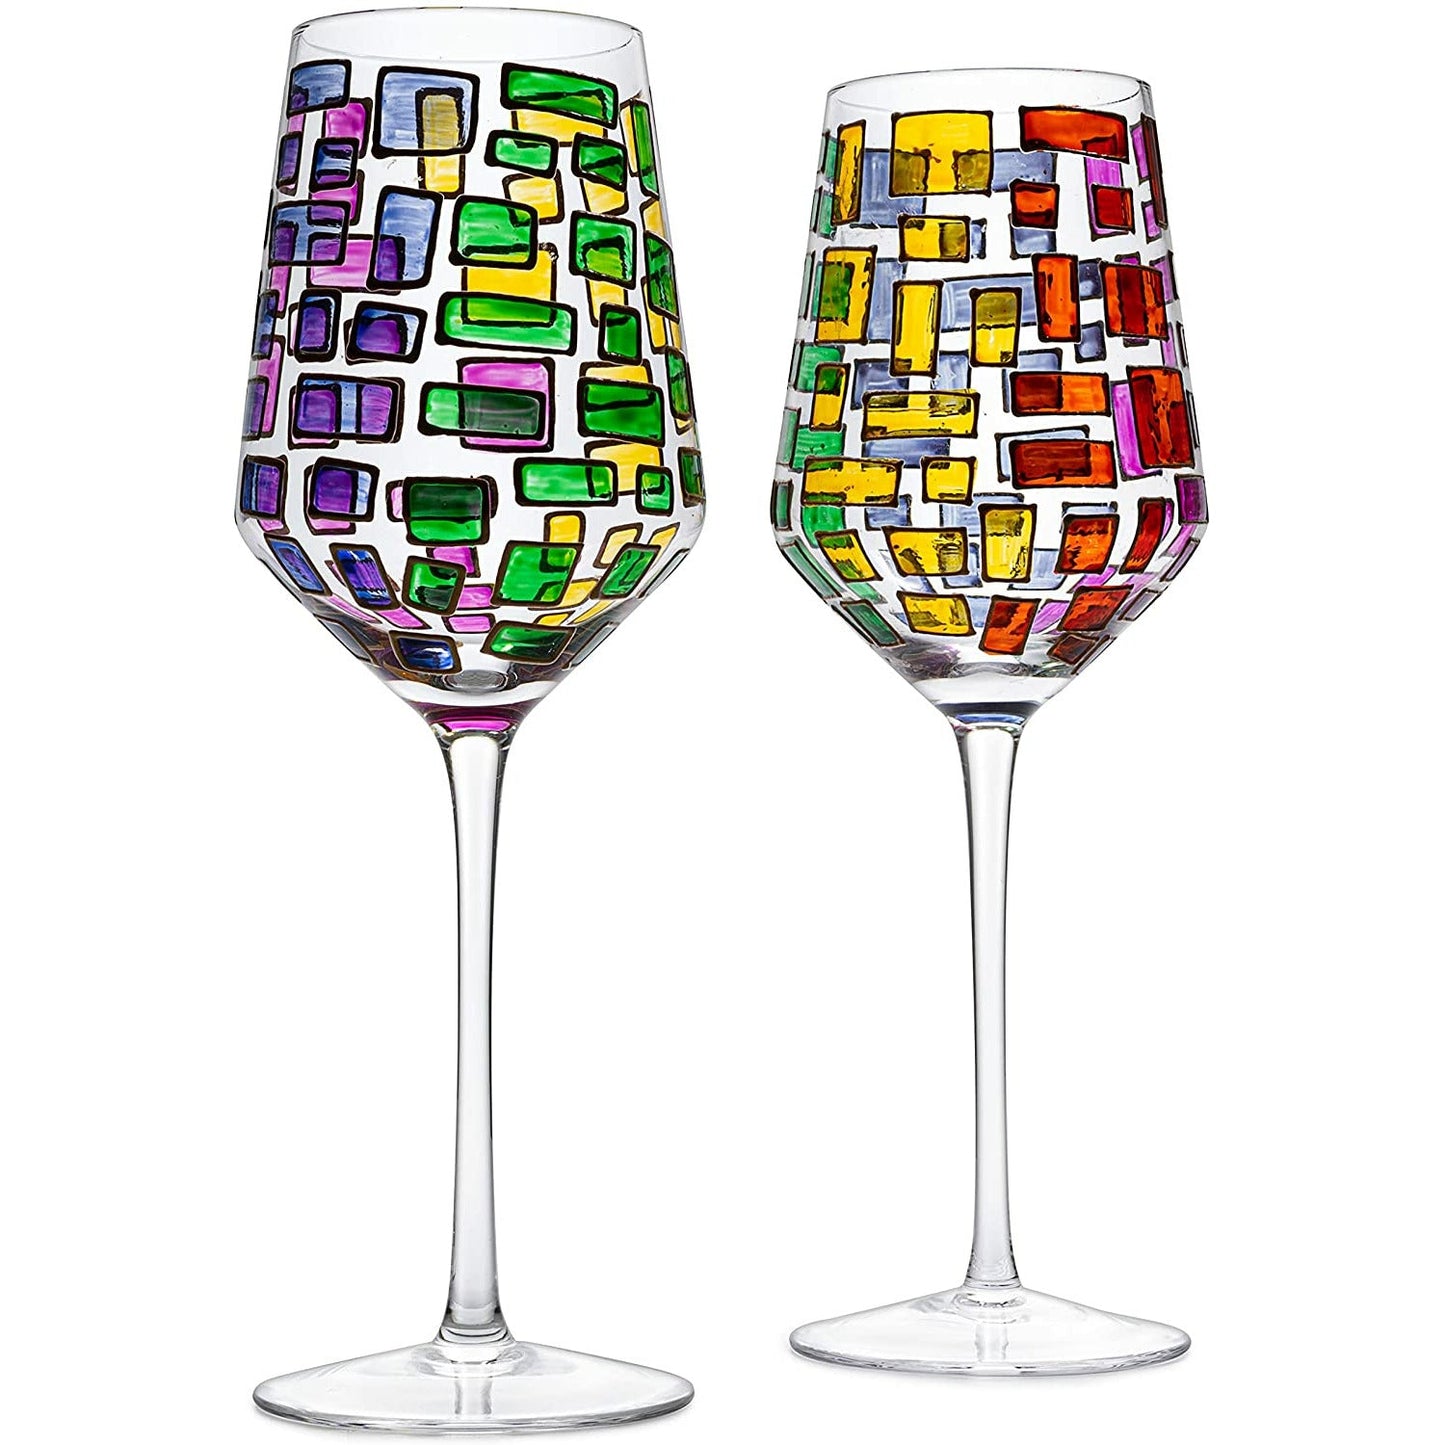 Renaissance Stained Wine Glasses Set of 2 by The Wine Savant - Festive  Colorful Coffee Cups, Stained Window, Multicolored, Home Bar Gift, Colored